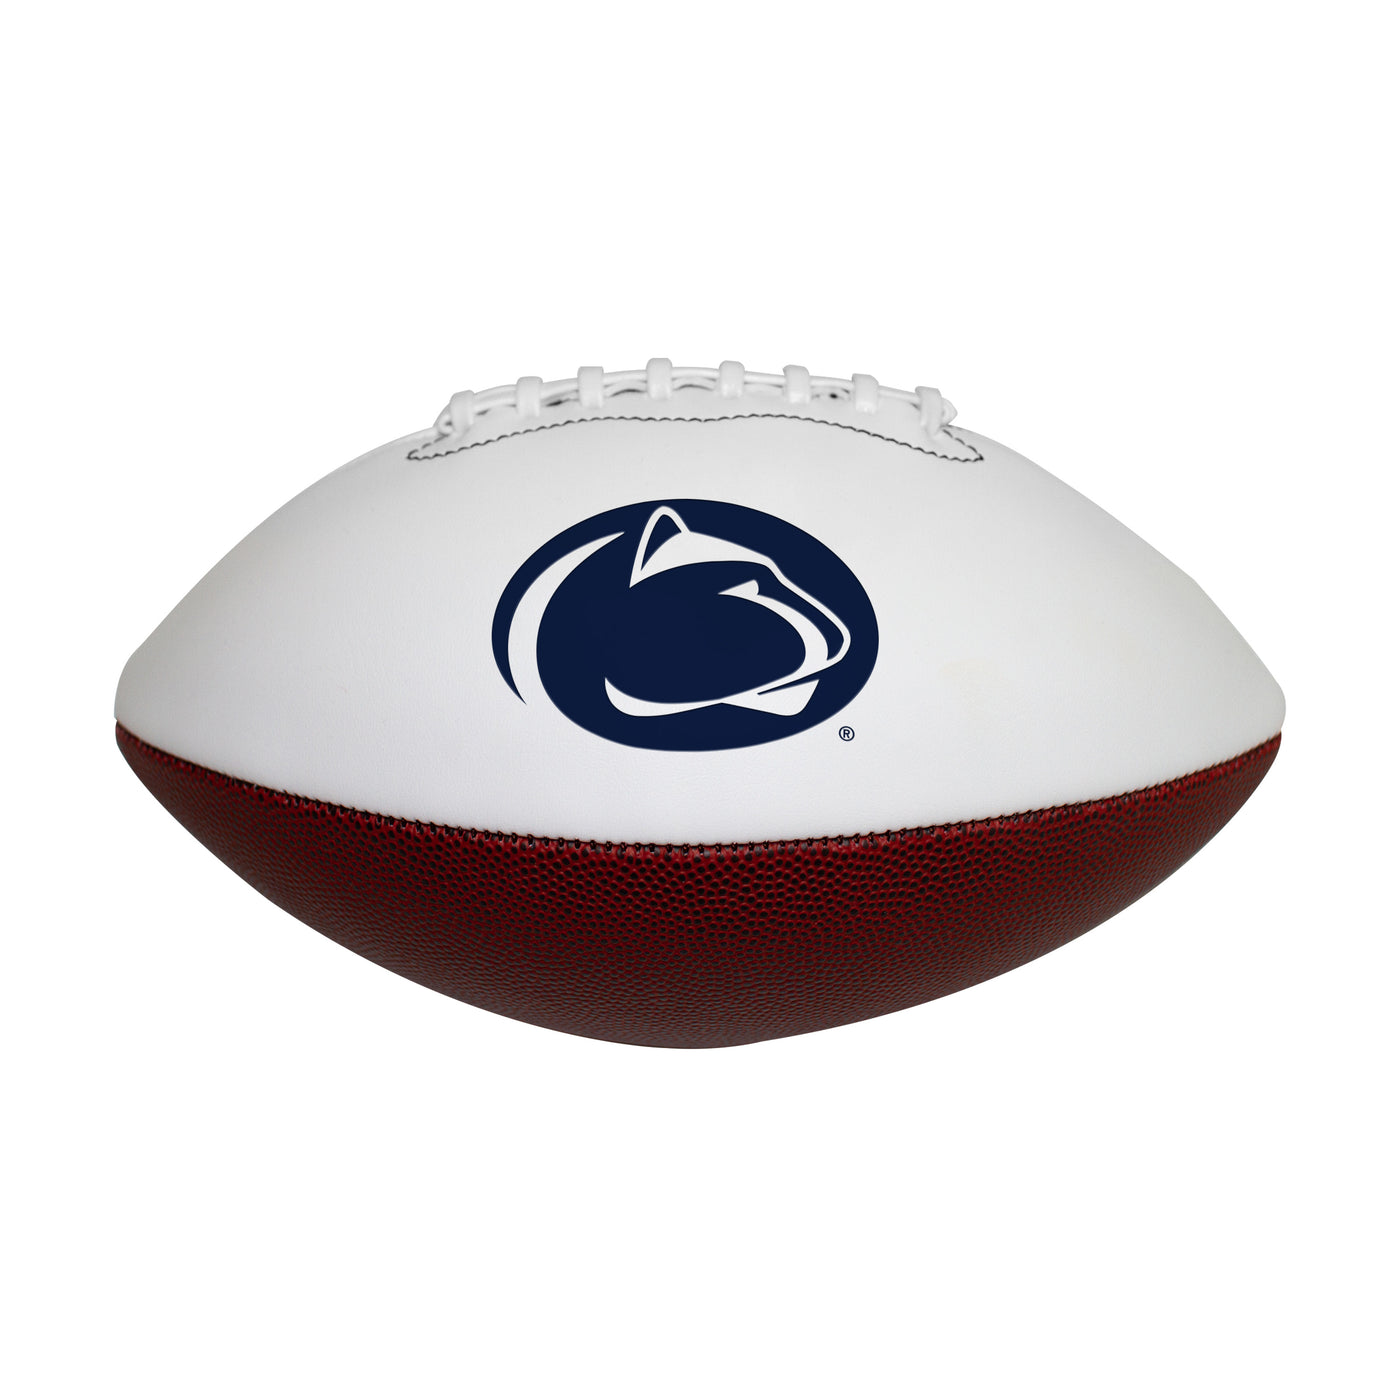 Penn State Official-Size Autograph Football